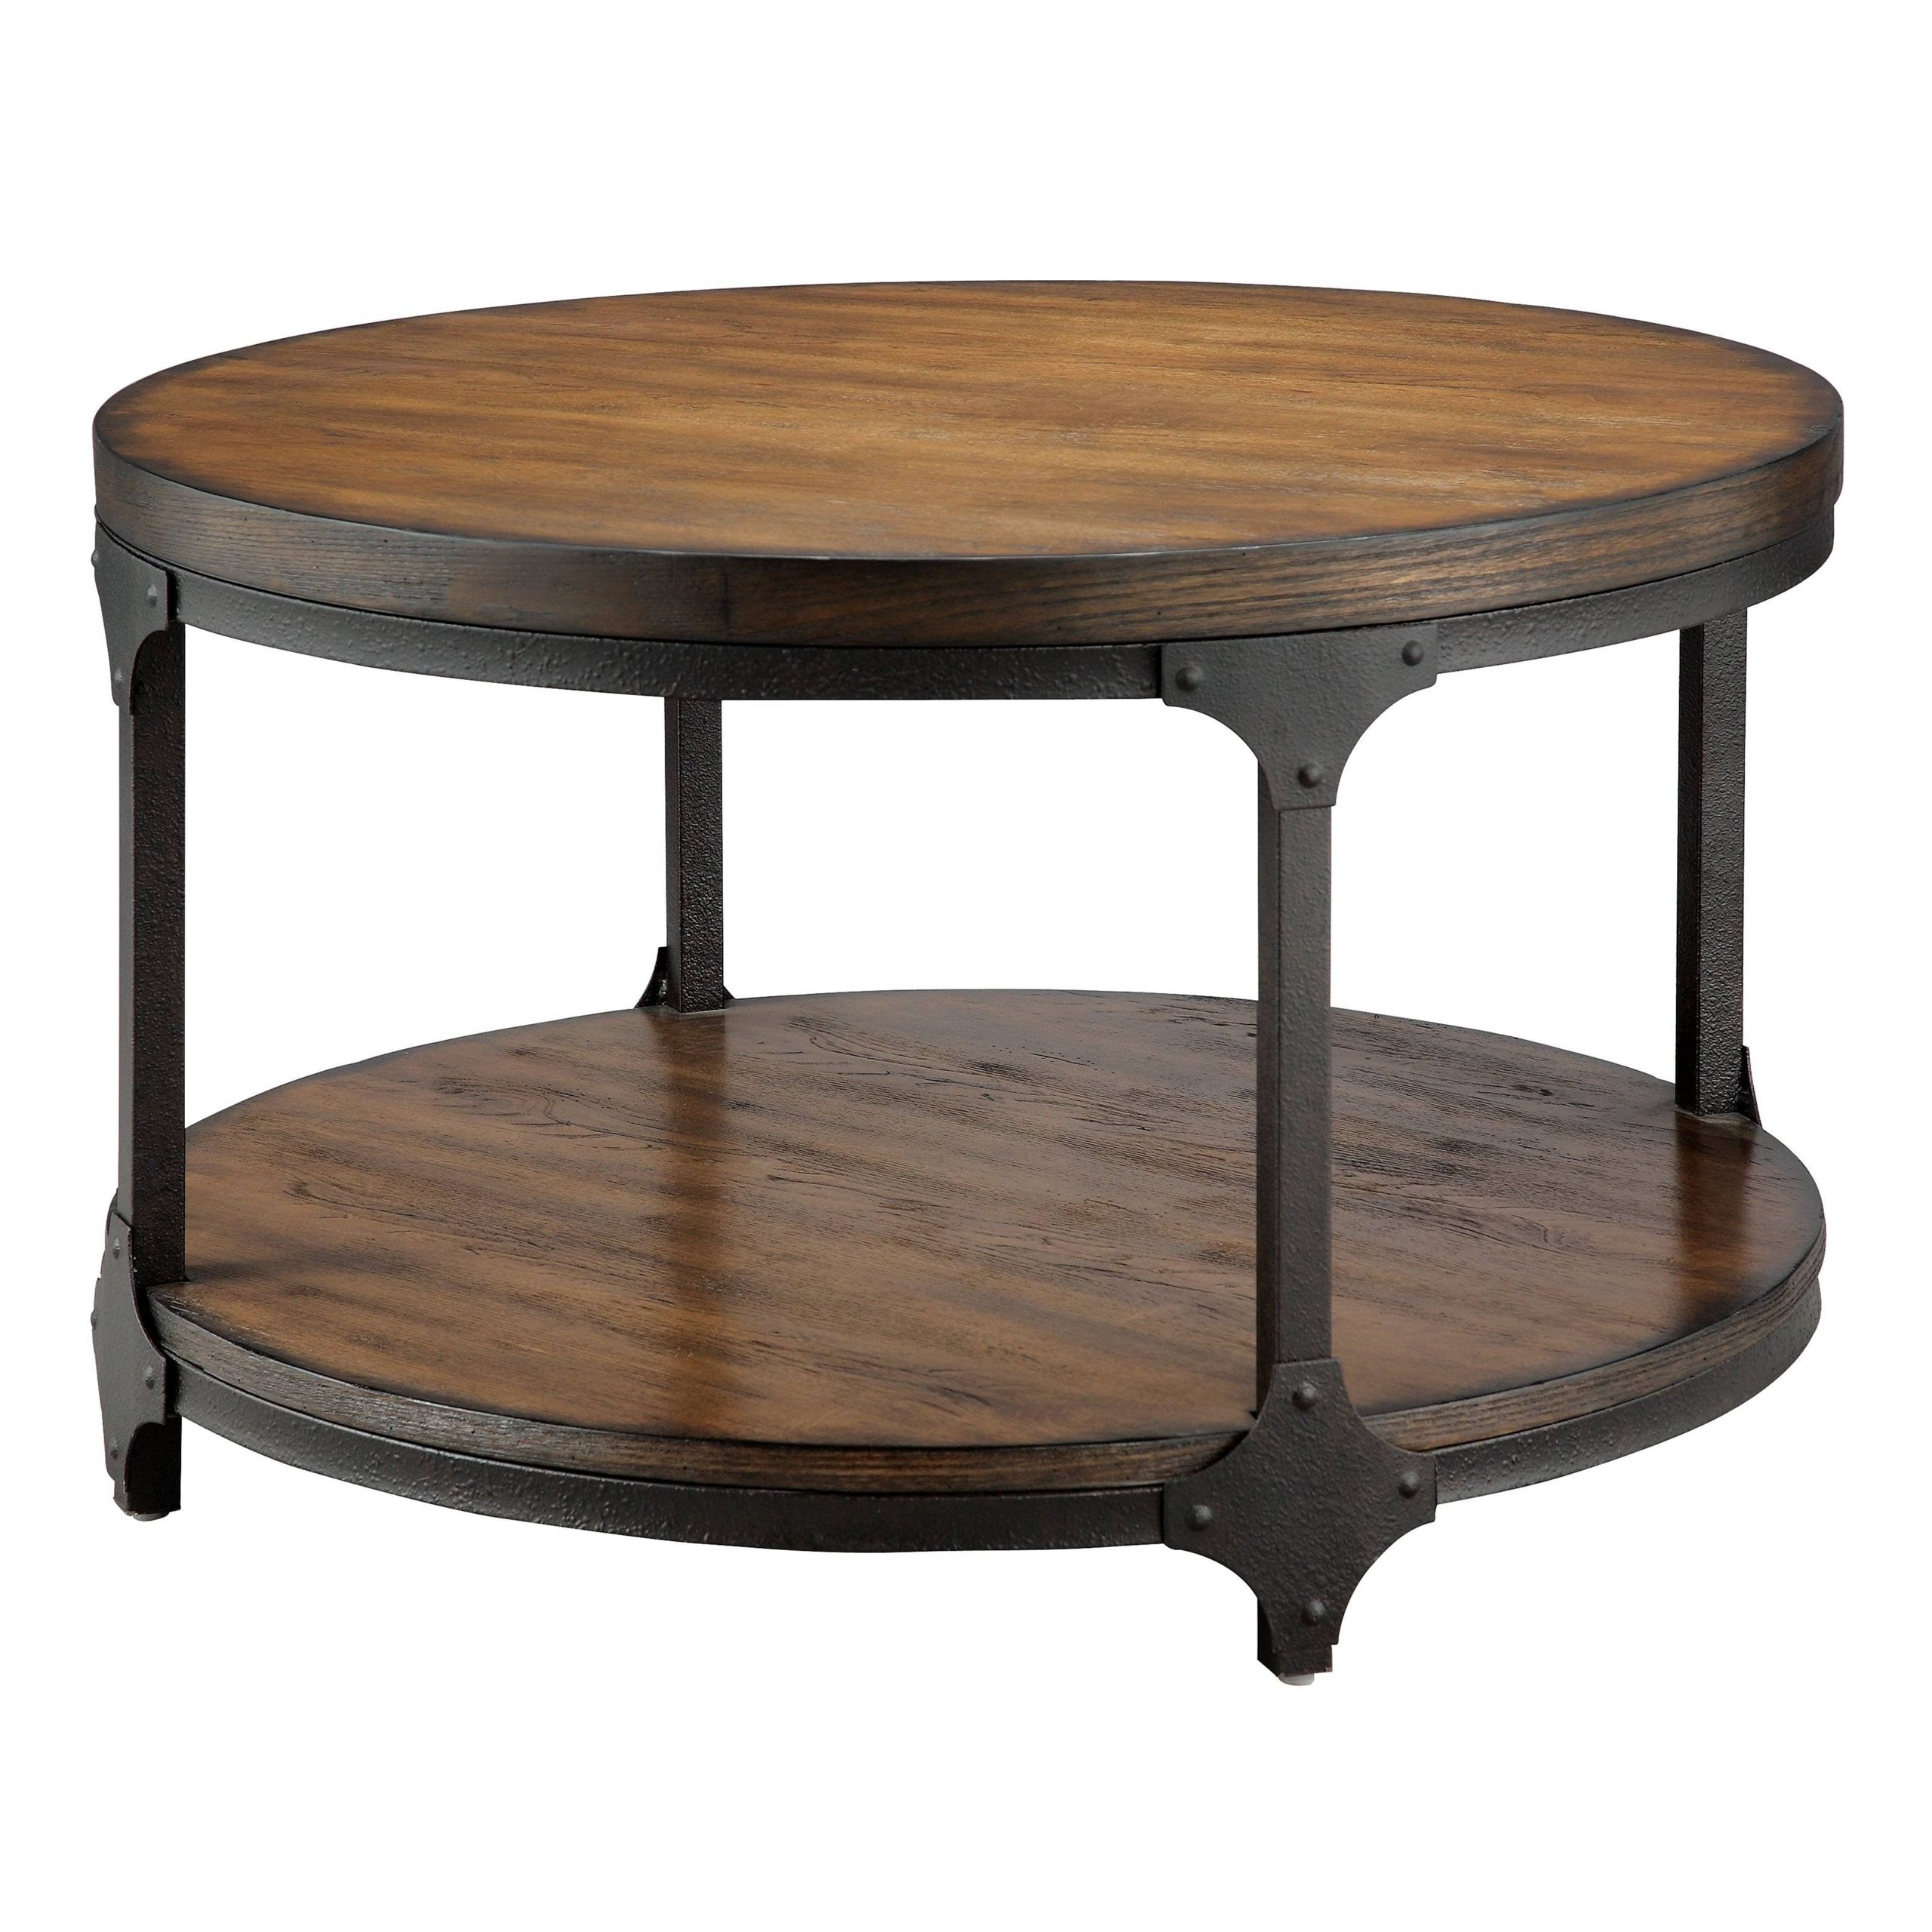 Round Industrial Coffee Table – Ideas On Foter With Regard To Well Liked Round Industrial Coffee Tables (View 9 of 20)